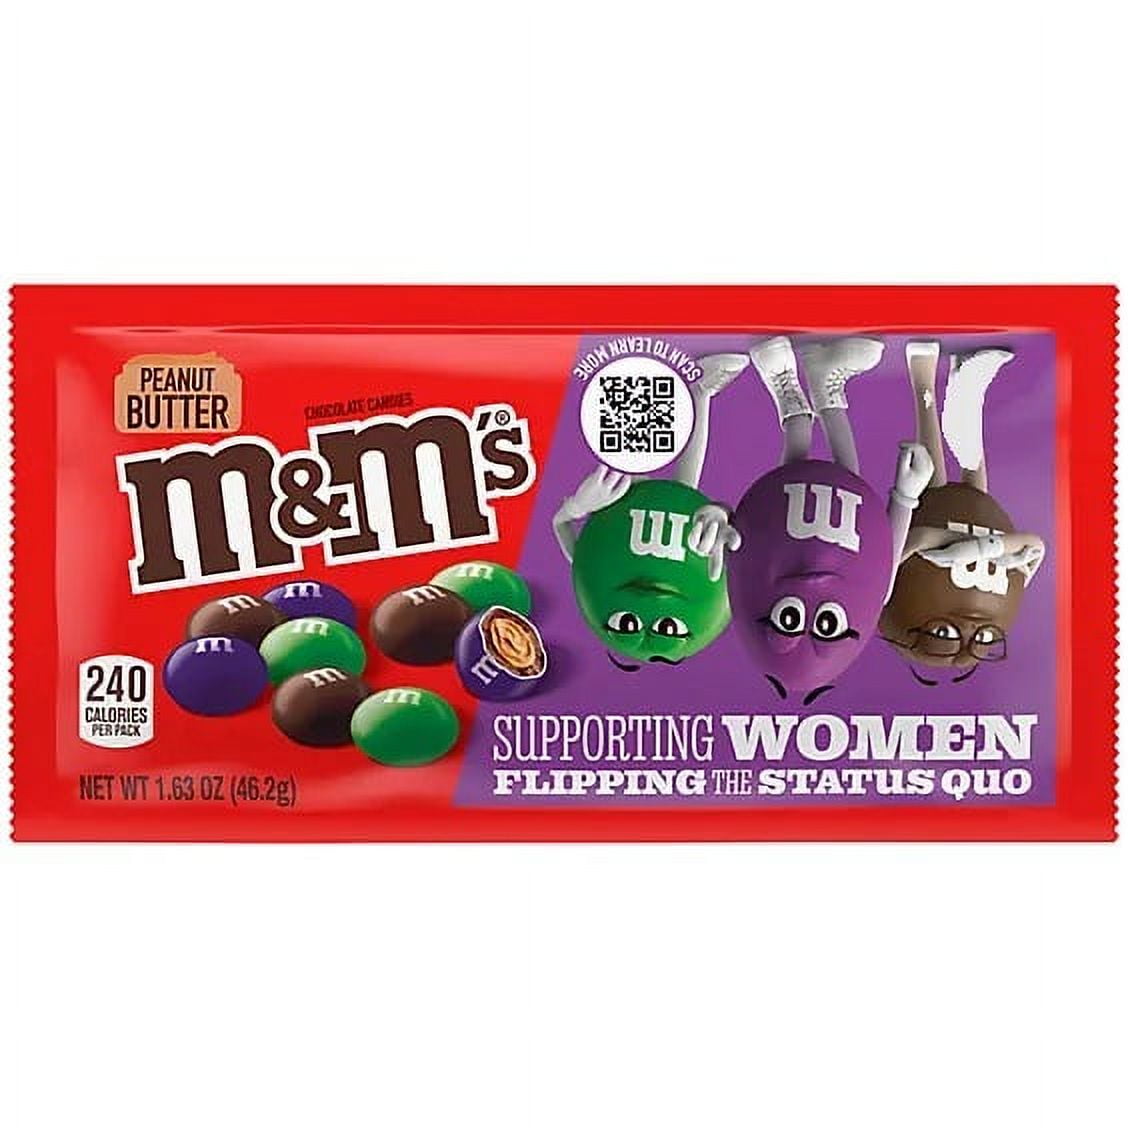 M&M's Limited Edition Peanut Chocolate Candy Featuring Purple Candy, Share  Size, 3.27 Oz Bag, Chocolate Candy